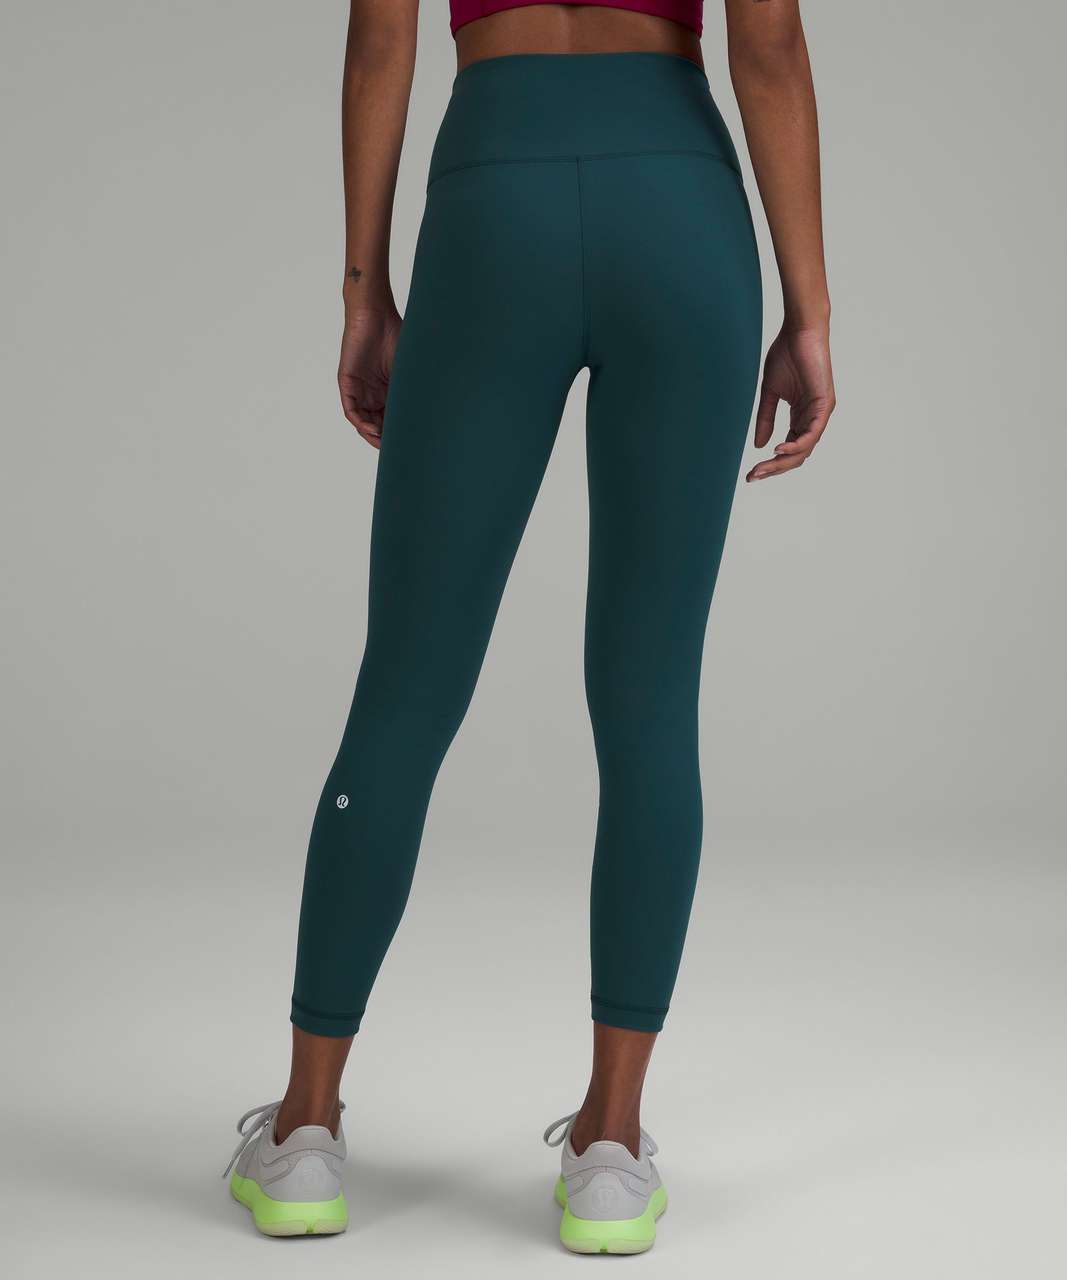 Lululemon 2019 Wunder Under High-Rise Tight 25 in washed green size 12